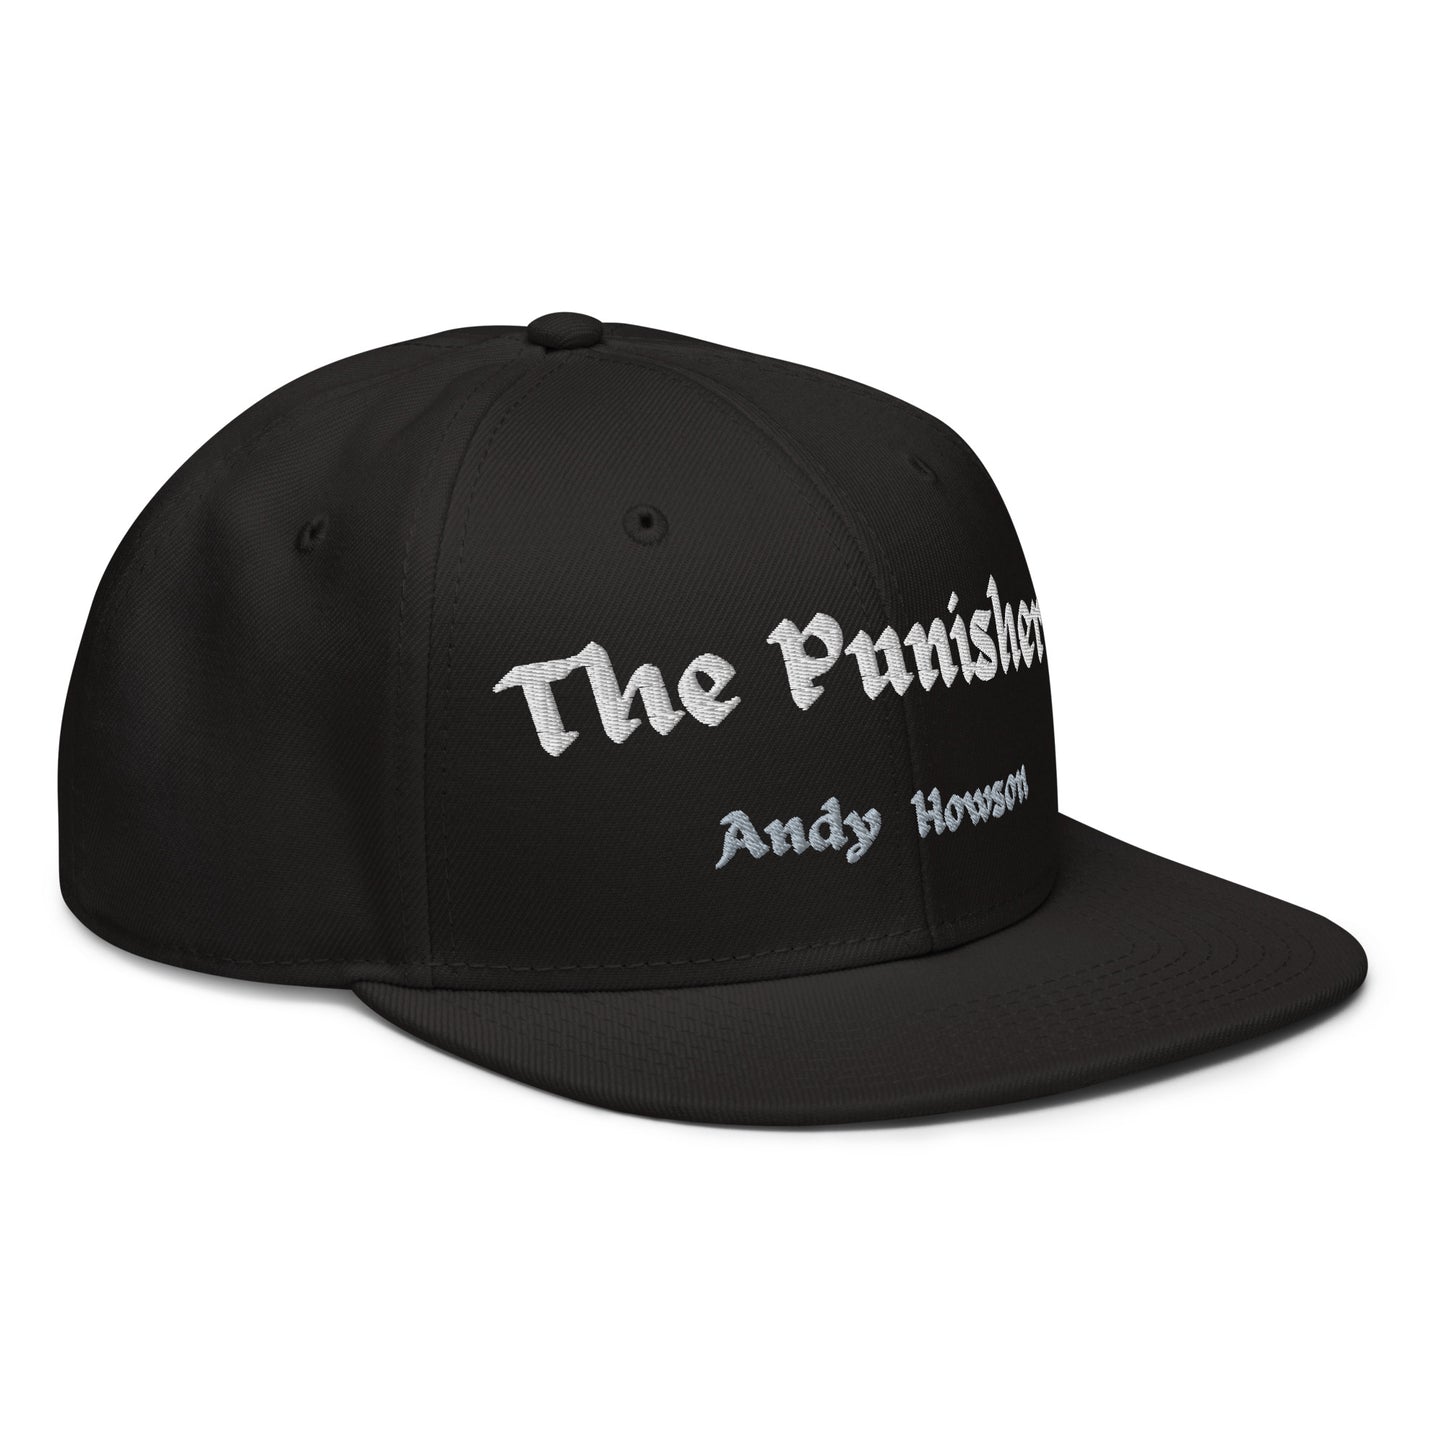 ANDY HOWSON "The Punisher" - Hat